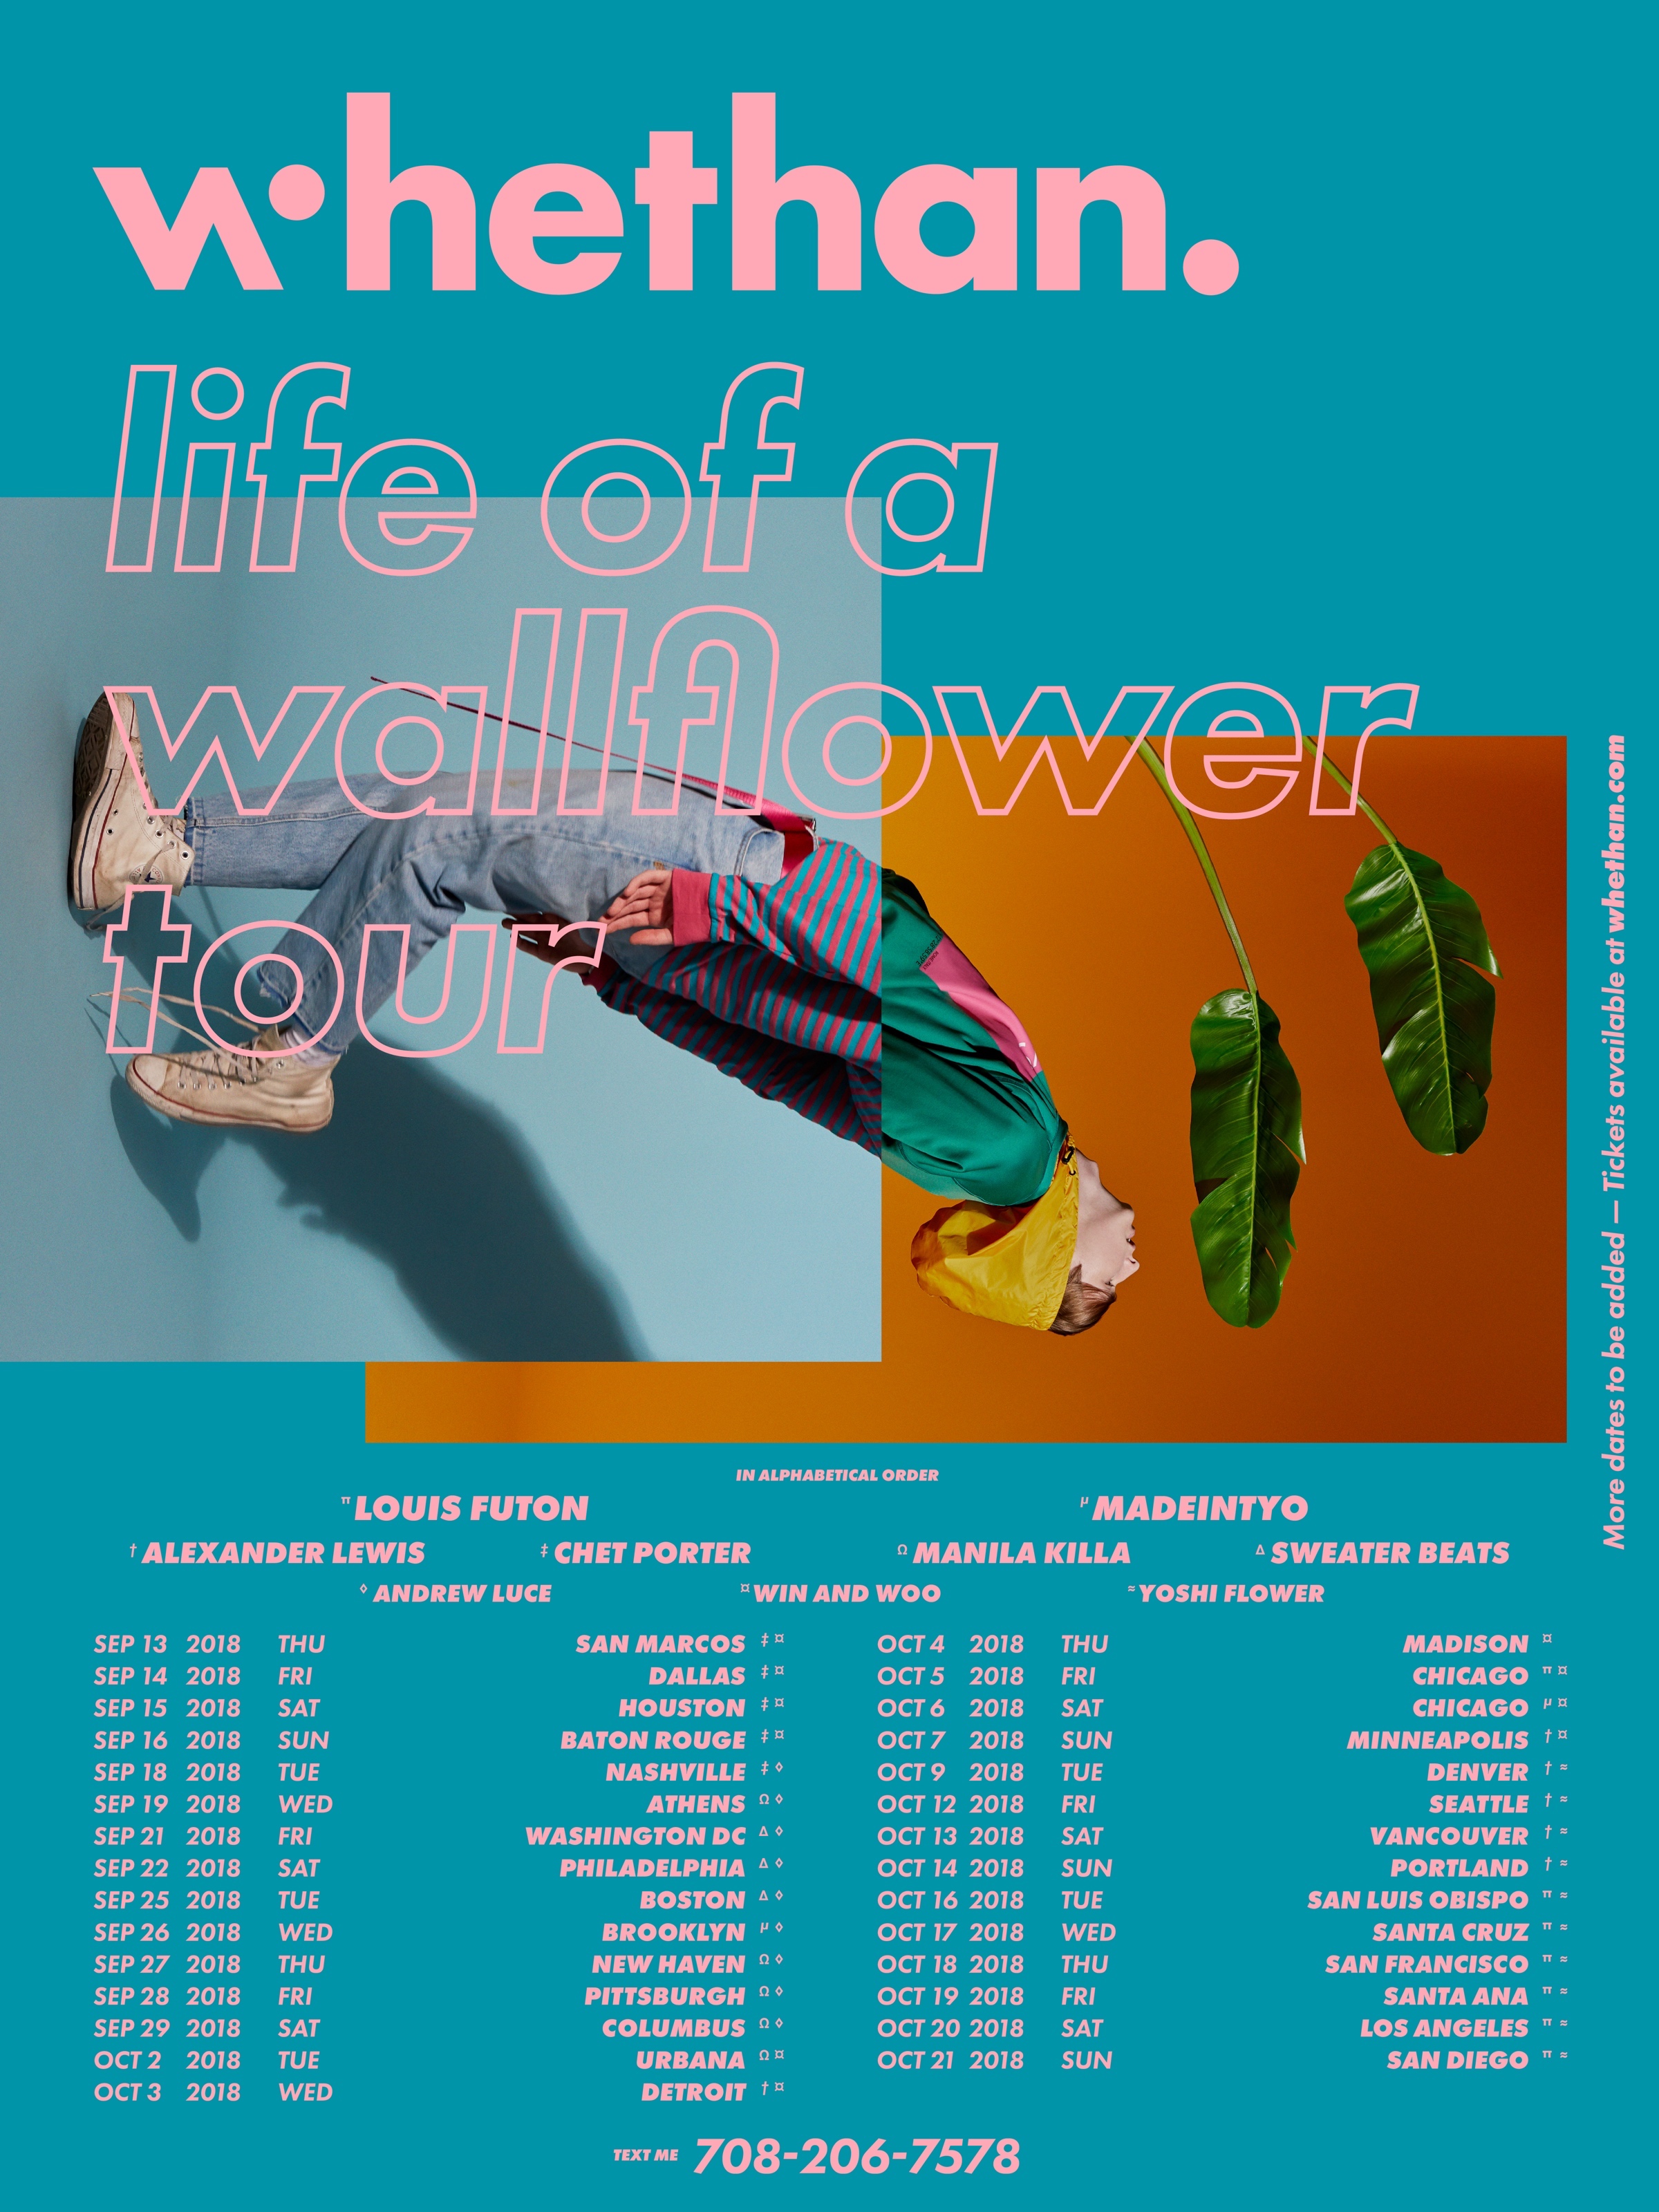 whethan_2018-tour_poster_082218_NAT_cropped@2x